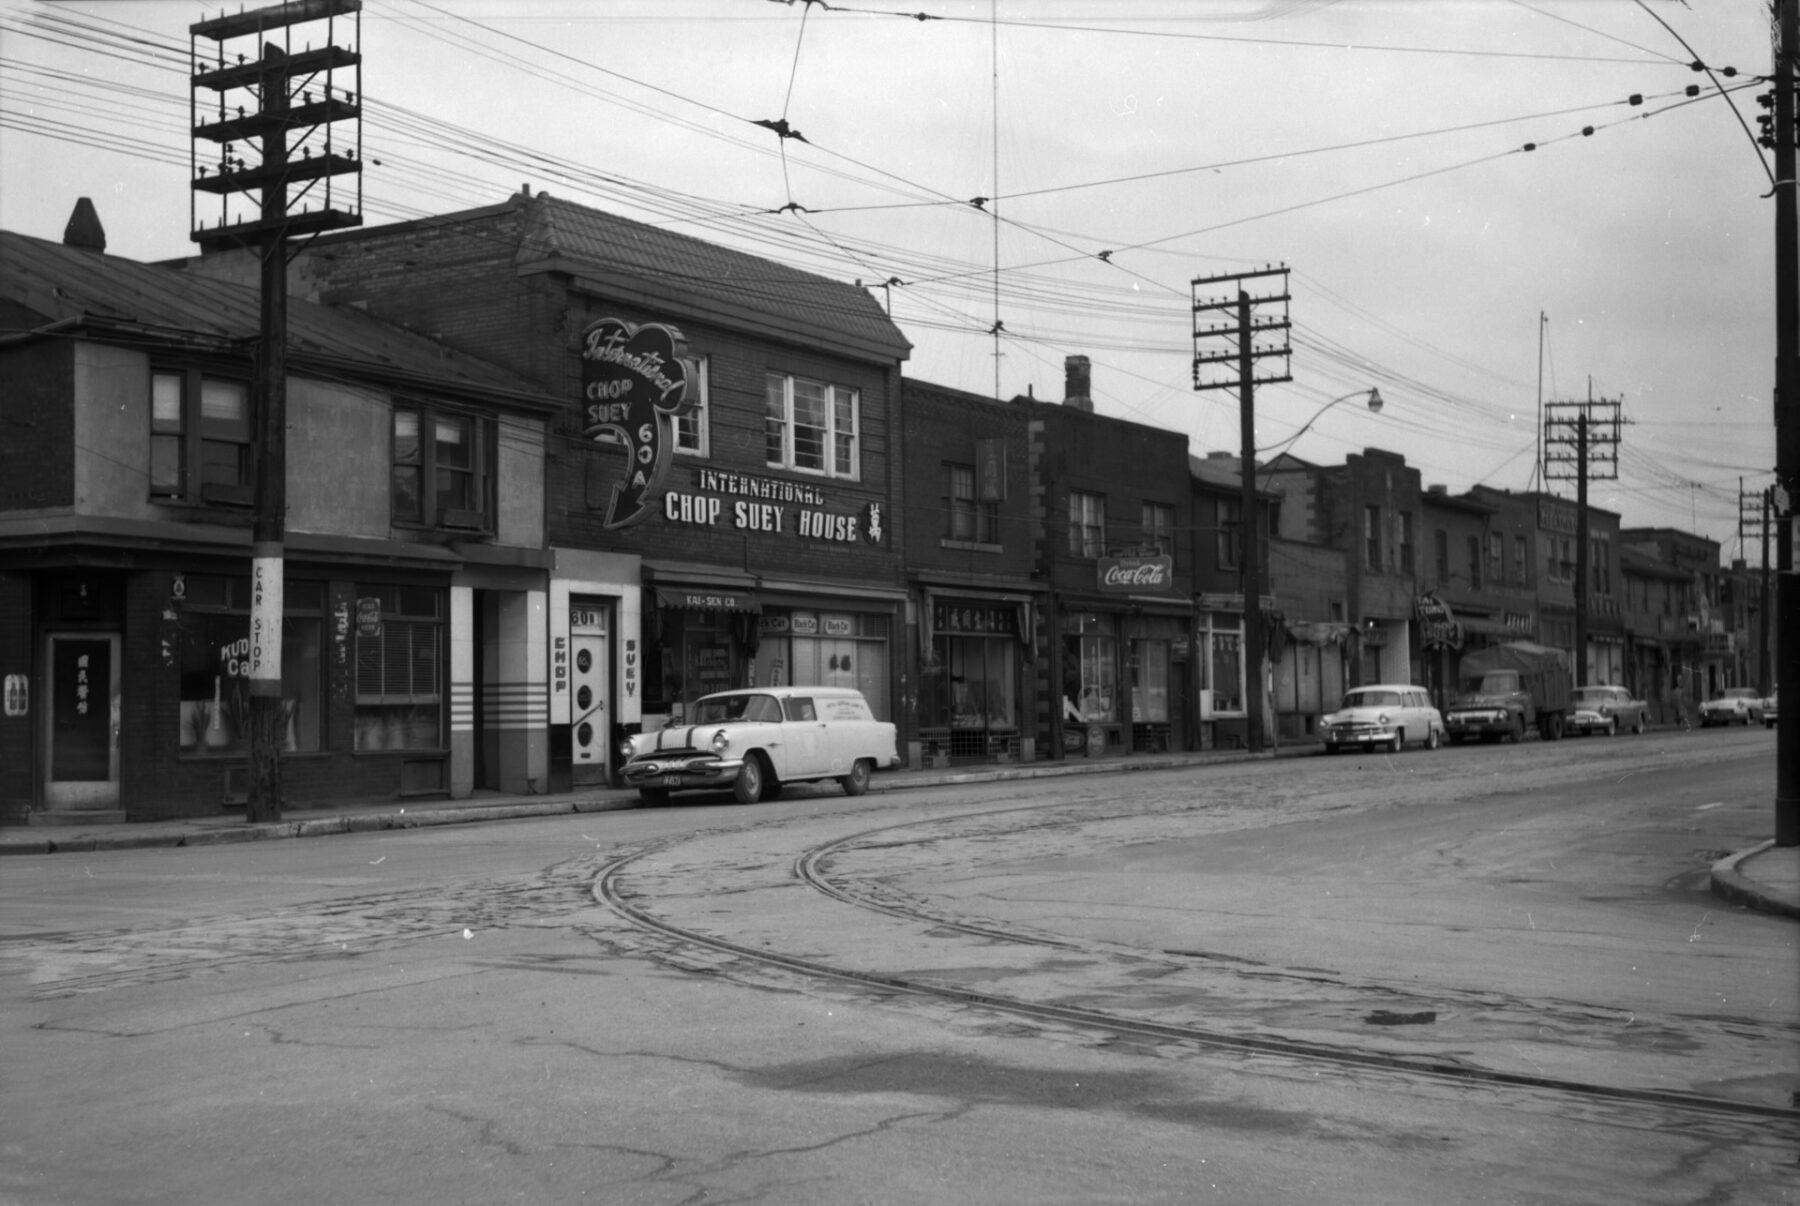 A black and white photograph depicting a street scene. A  series of one and two-storey buildings can be seen behind a row of electric poles. The largest building has a sign out front that reads "International Chop Suey House."